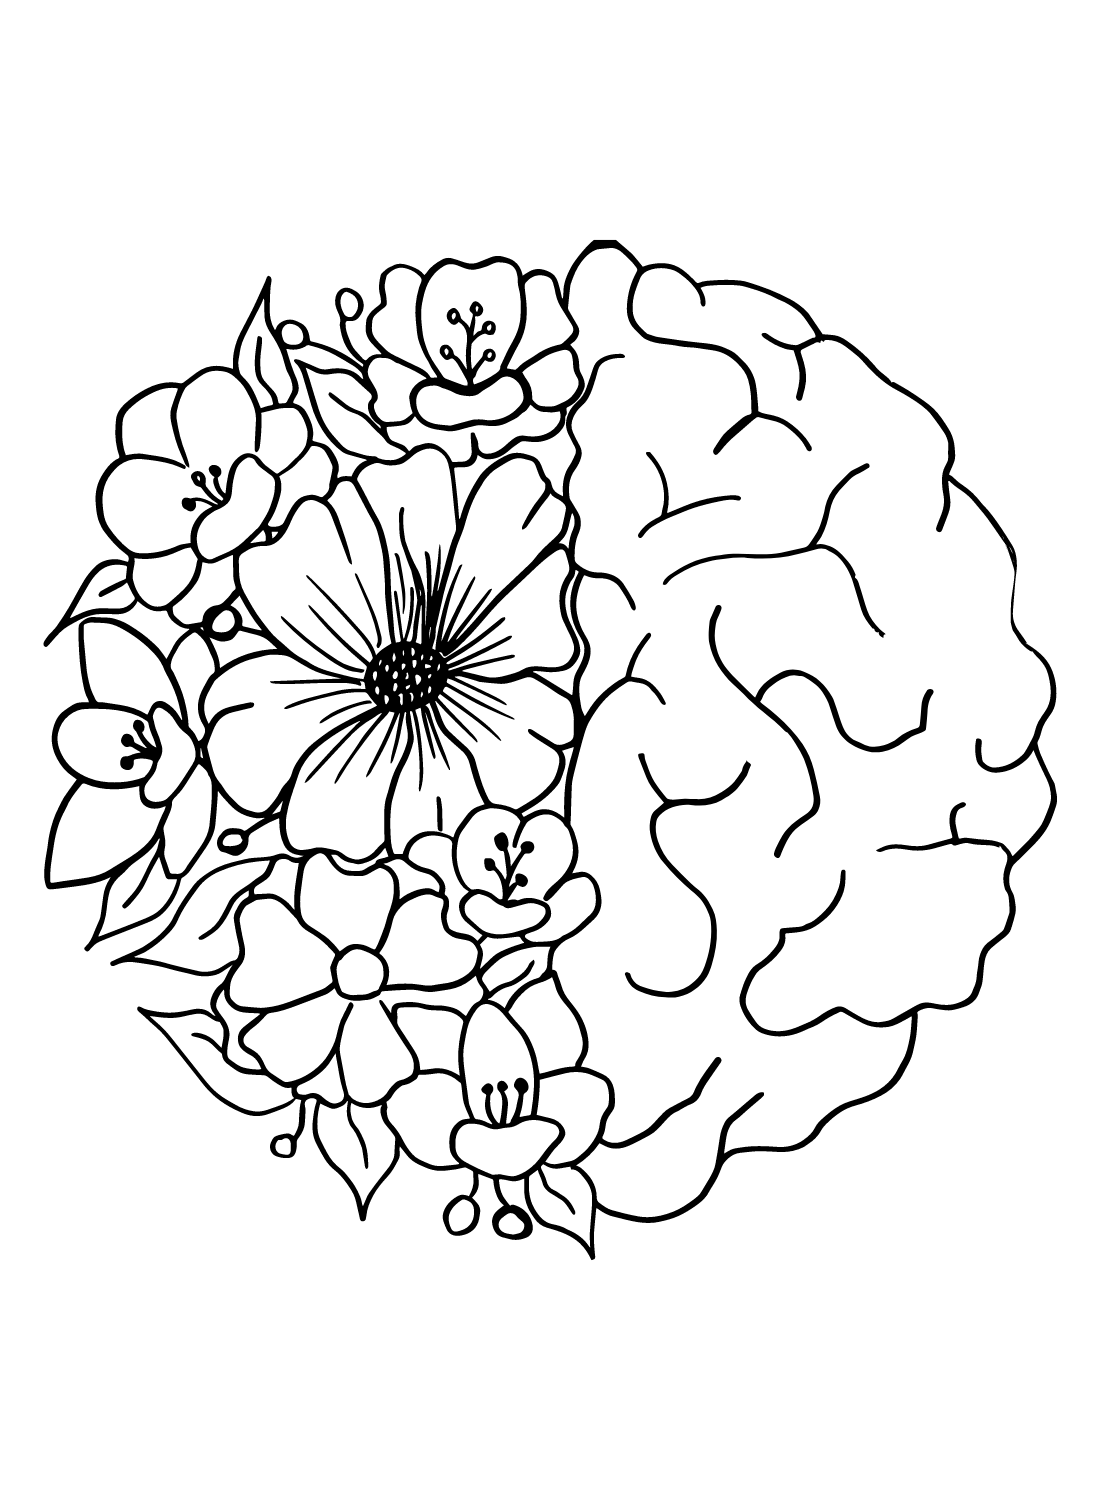 Coloring Pages For Mental Health